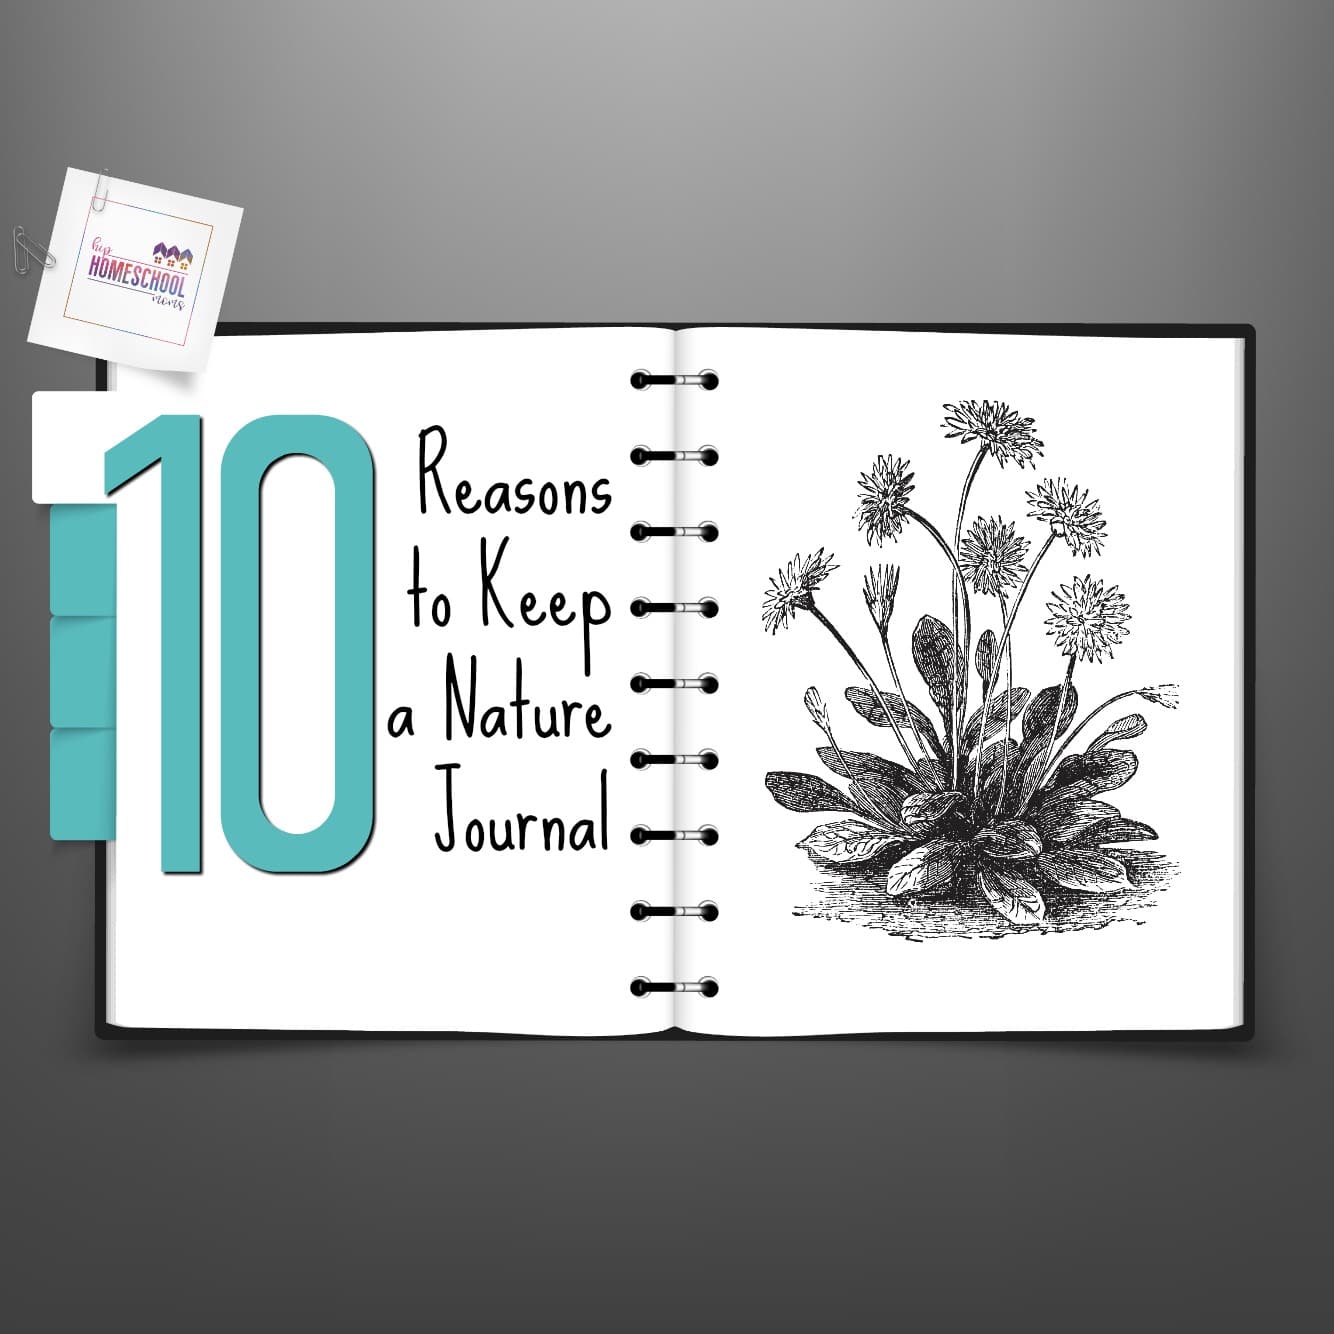 10 Reasons to Keep a Nature Journal